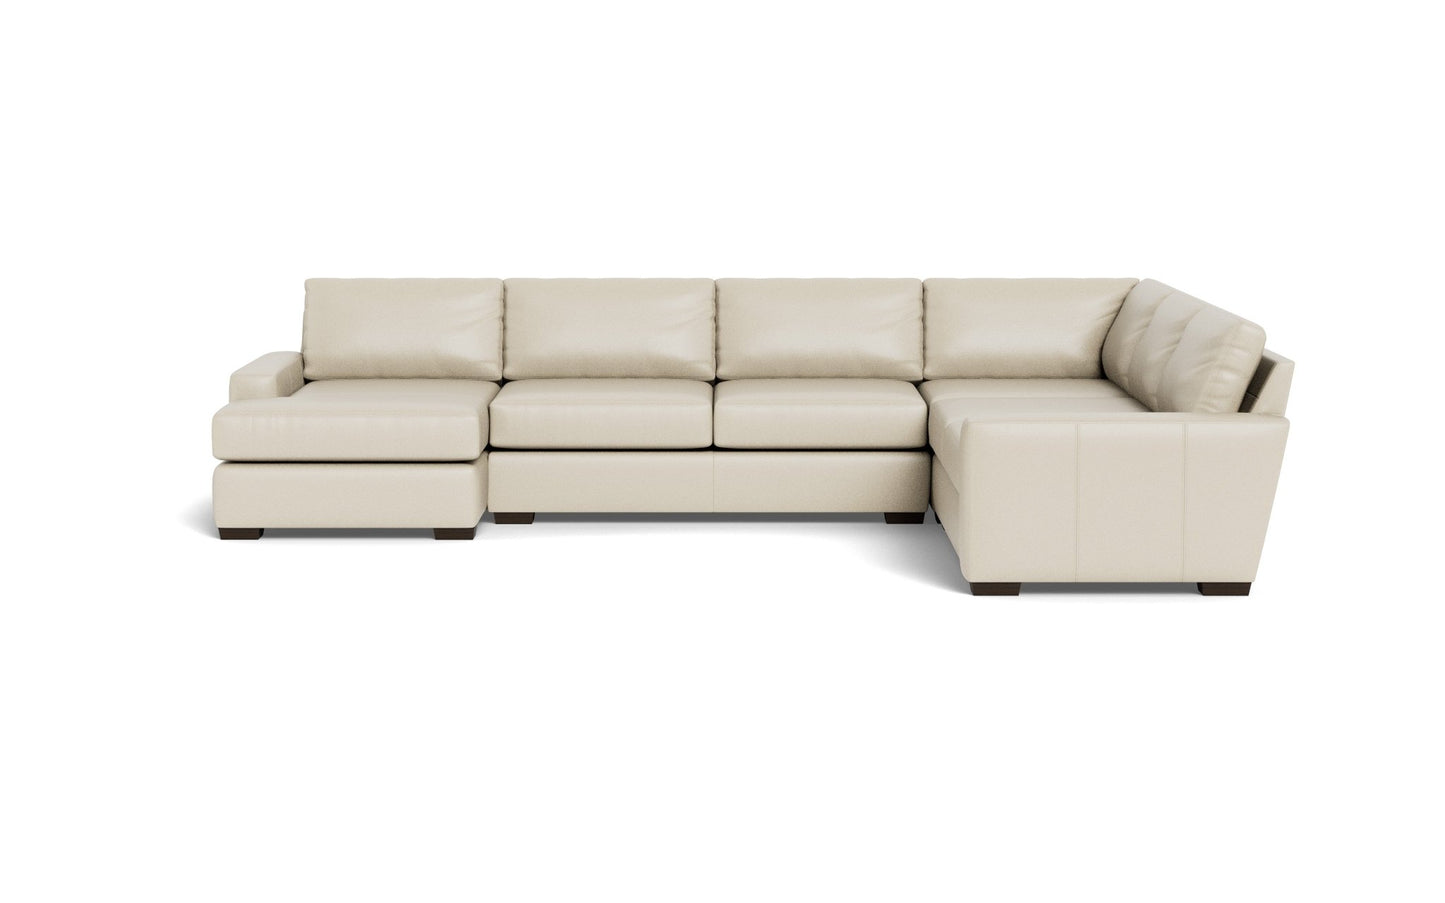 Mas Mesa Leather Corner Sectionals w. Left Chaise